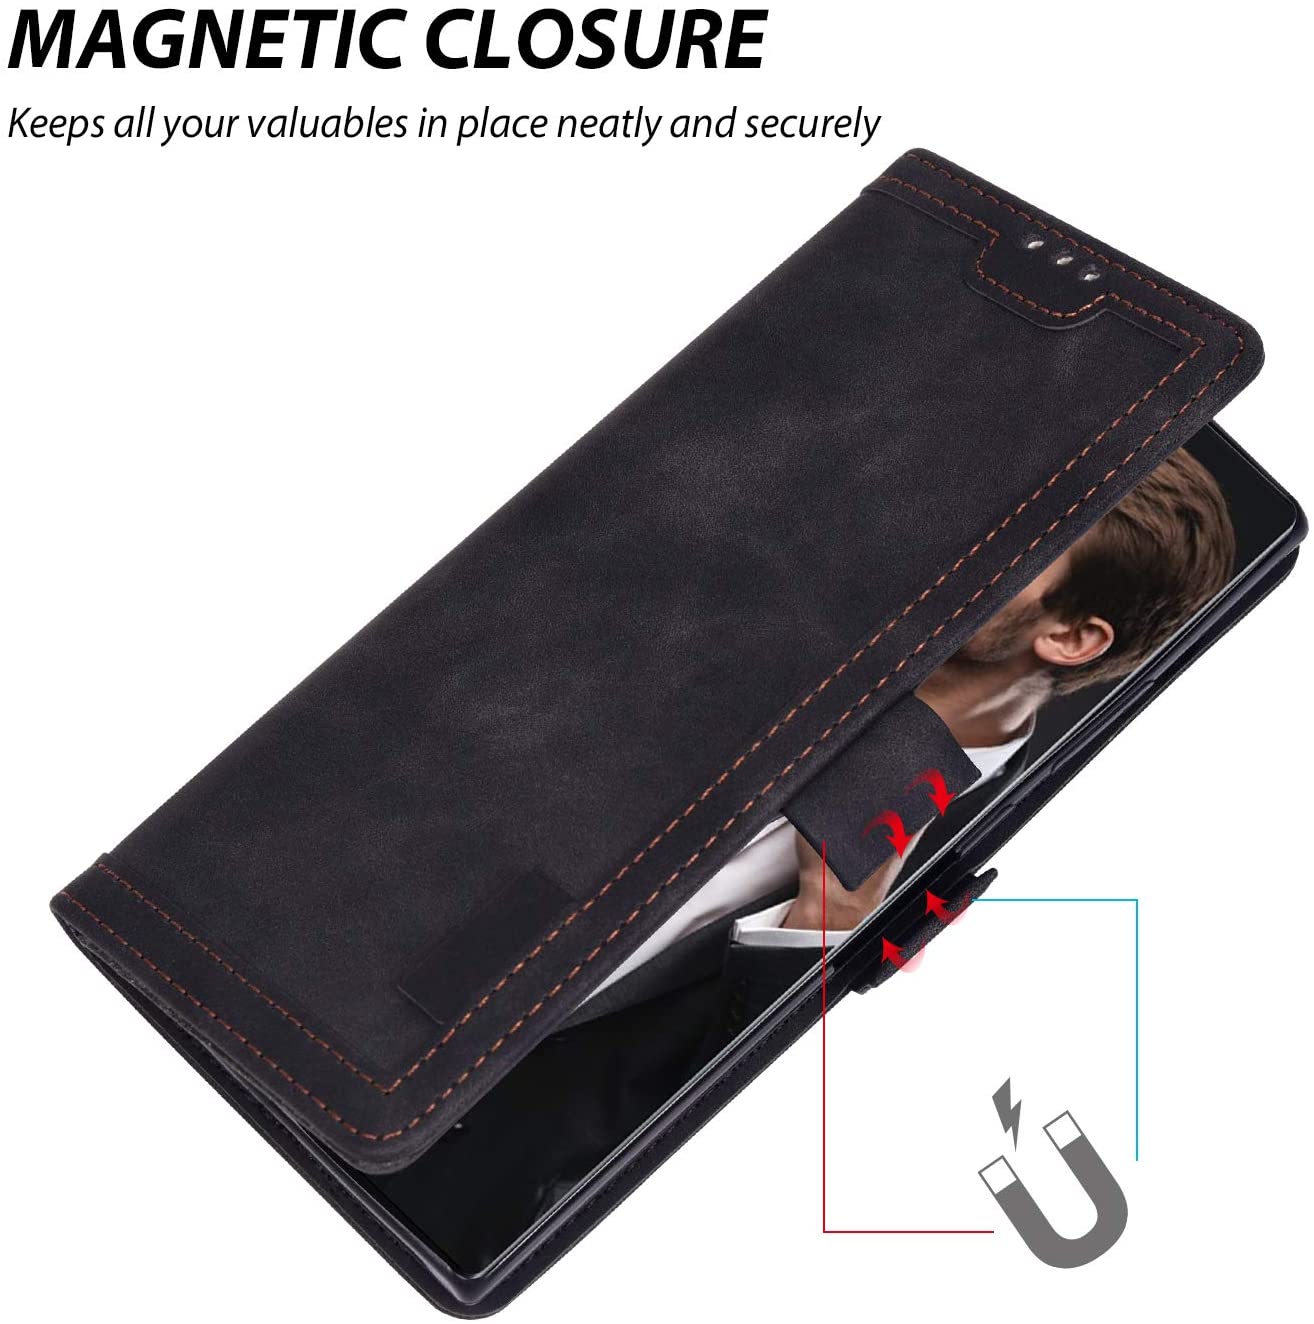 Excelsior Premium PU Leather Wallet flip Cover Case For Samsung Galaxy S20 Ultra